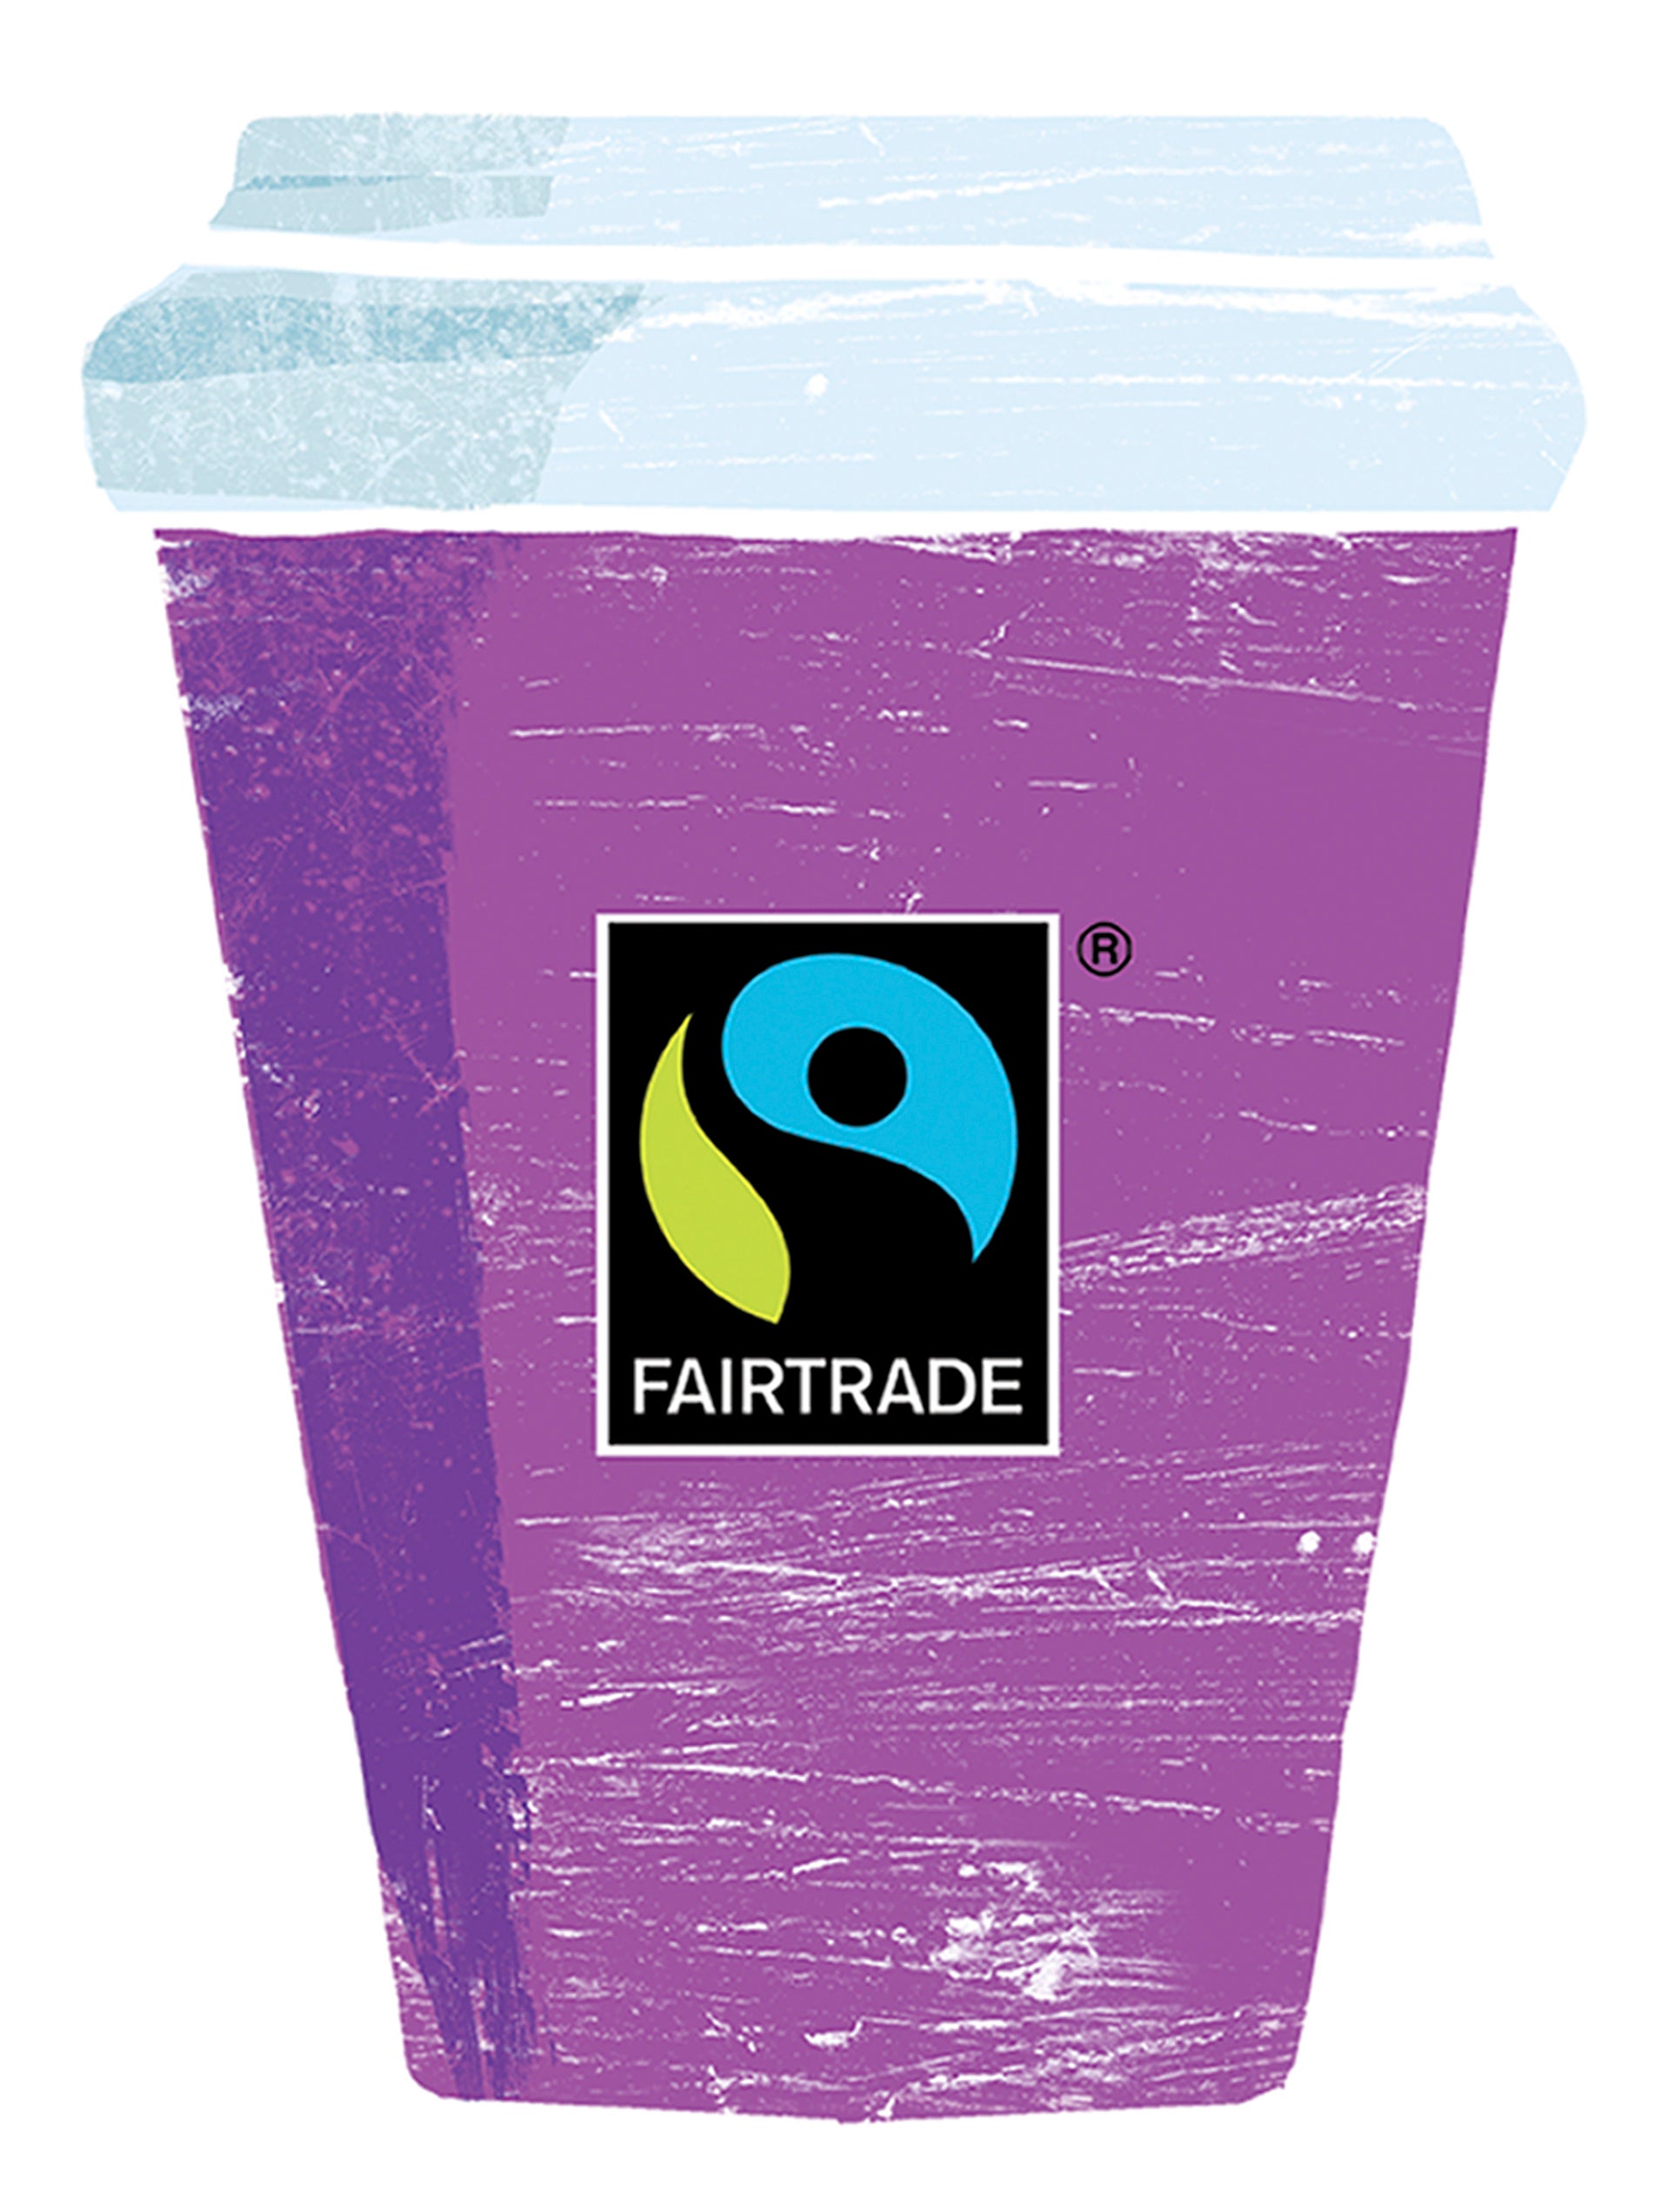 Increase in sales of fairtrade goods, says report (Fairtrade Foundation/PA)